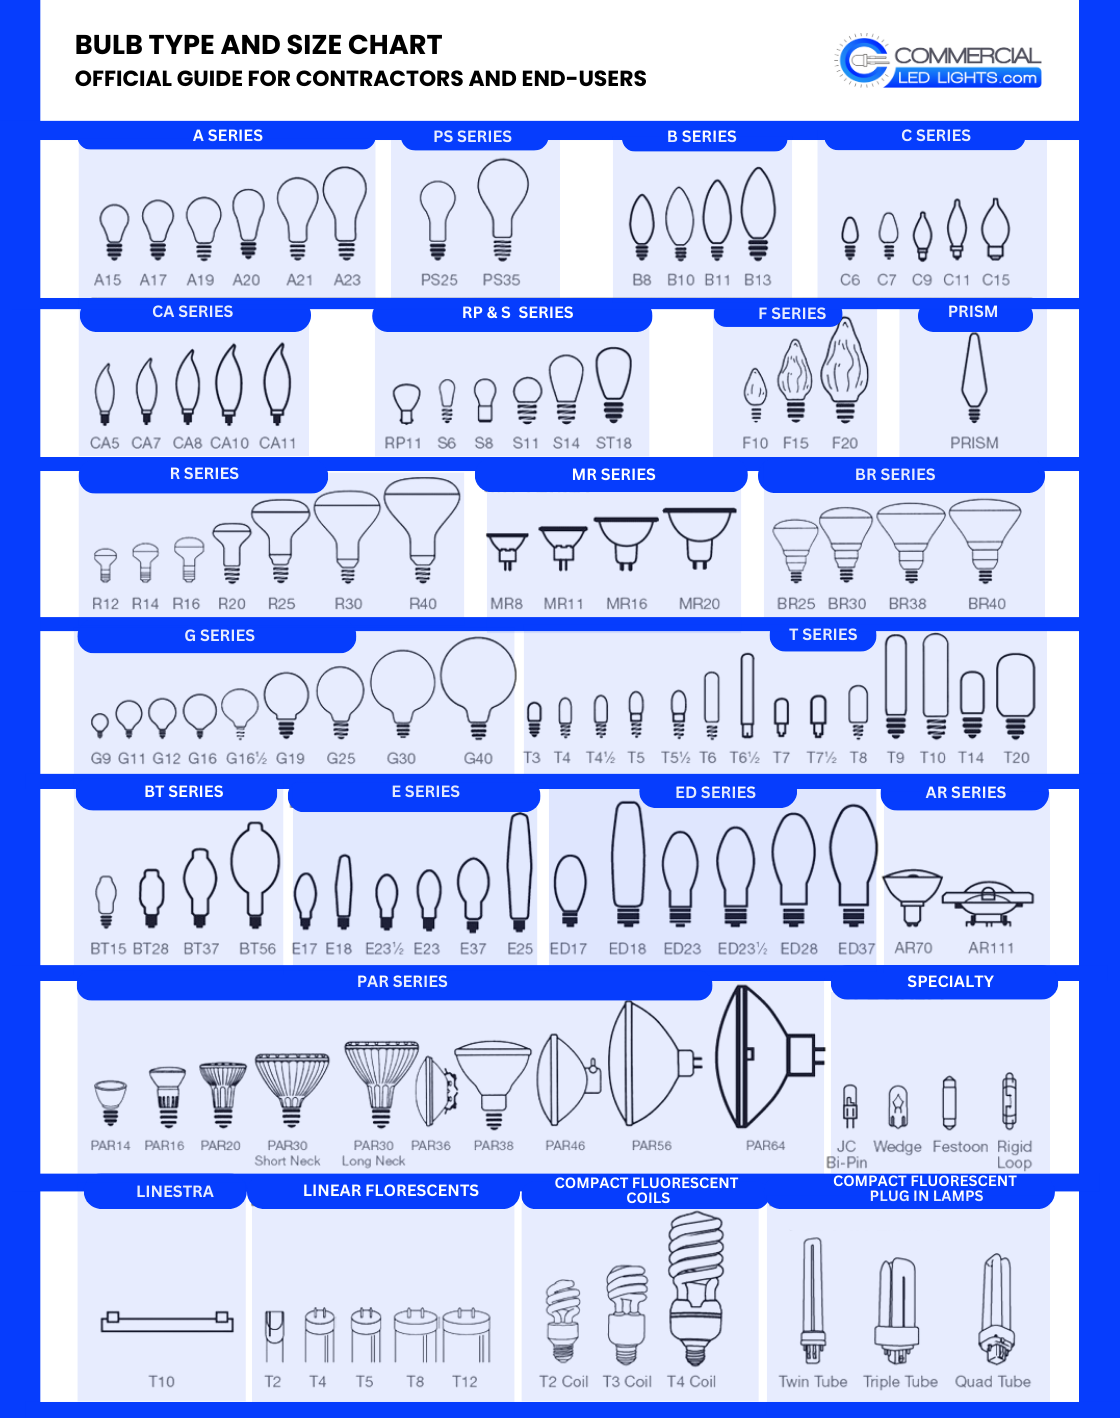 Chart showing light bulb size sizes and types such as a series light bulbs, g series light bulbs, and more. The chart is a guide for electrical contractors and end users.